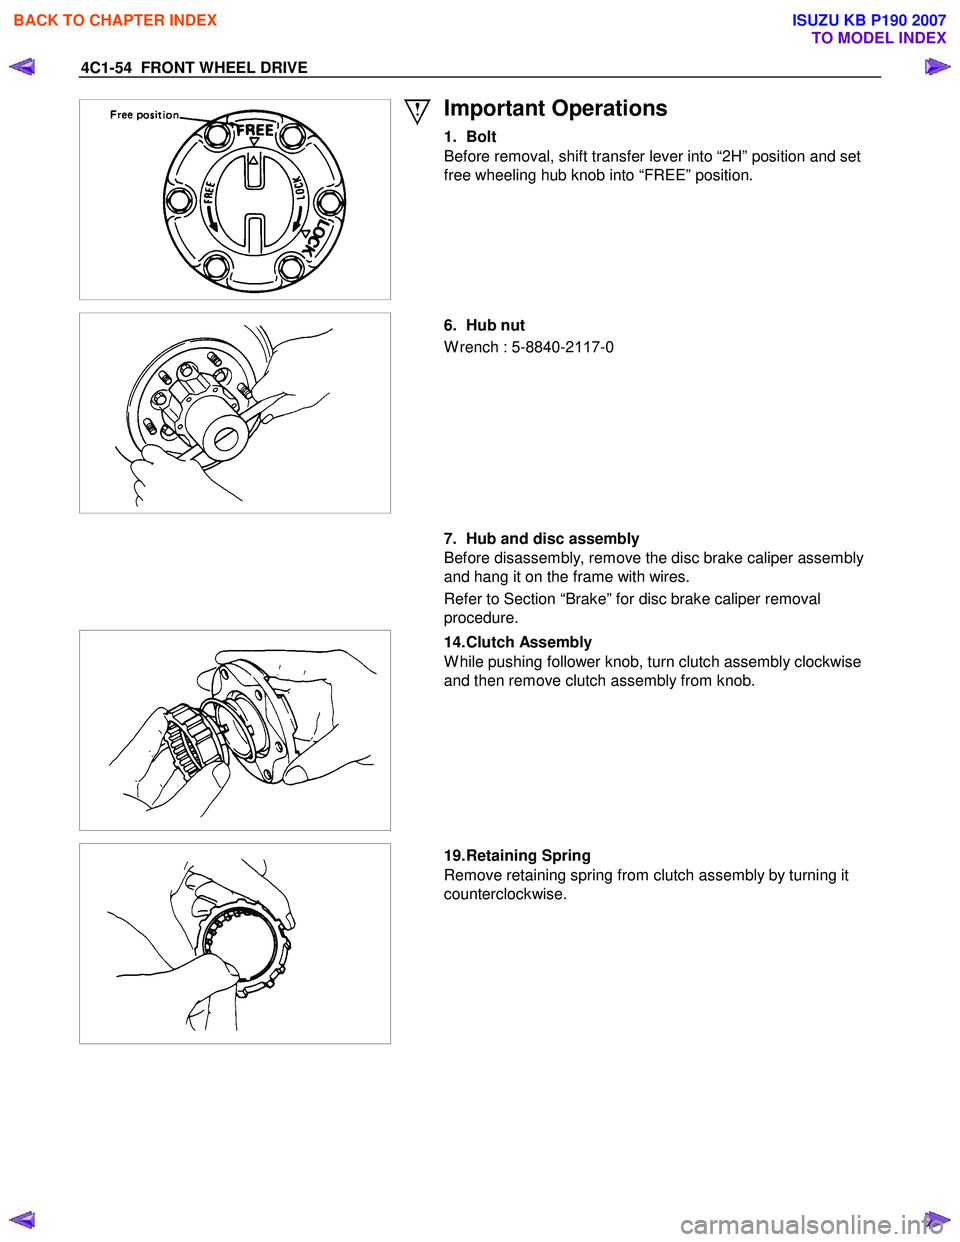 ISUZU KB P190 2007  Workshop Repair Manual 4C1-54  FRONT WHEEL DRIVE 
 
  
 
Important Operations 
1. Bolt  
Before removal, shift transfer lever into “2H” position and set  
free wheeling hub knob into “FREE” position.  
 
 
 
  6.  H